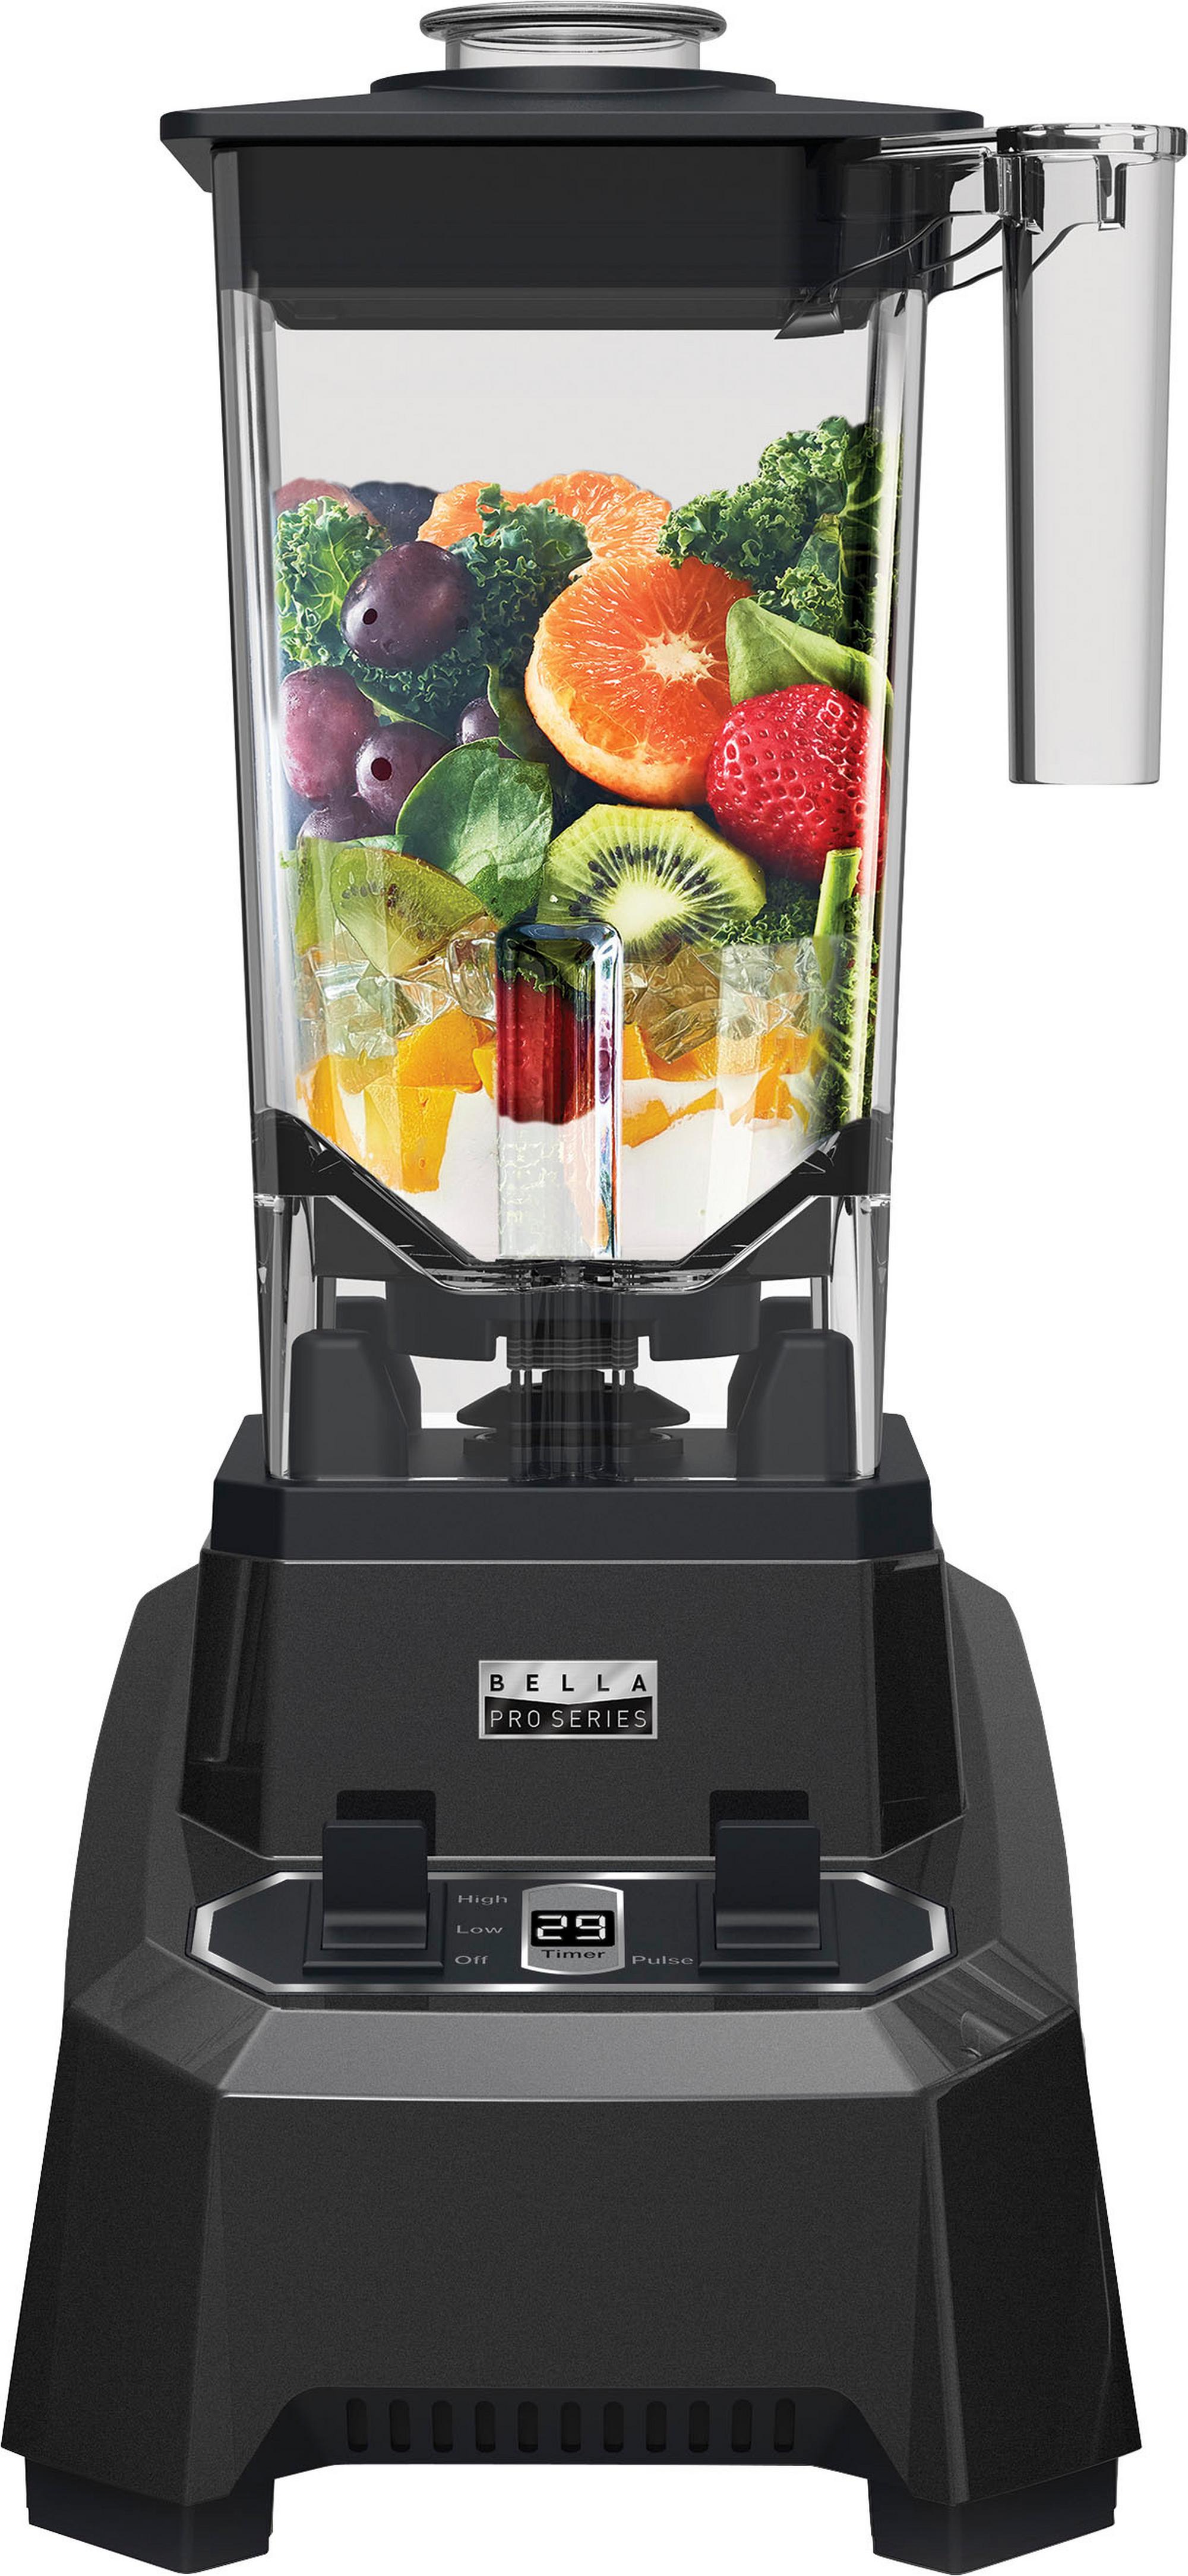 Rent to Own Bella Bella Pro Series - Precision Max Performance Blender -  Black at Aaron's today!